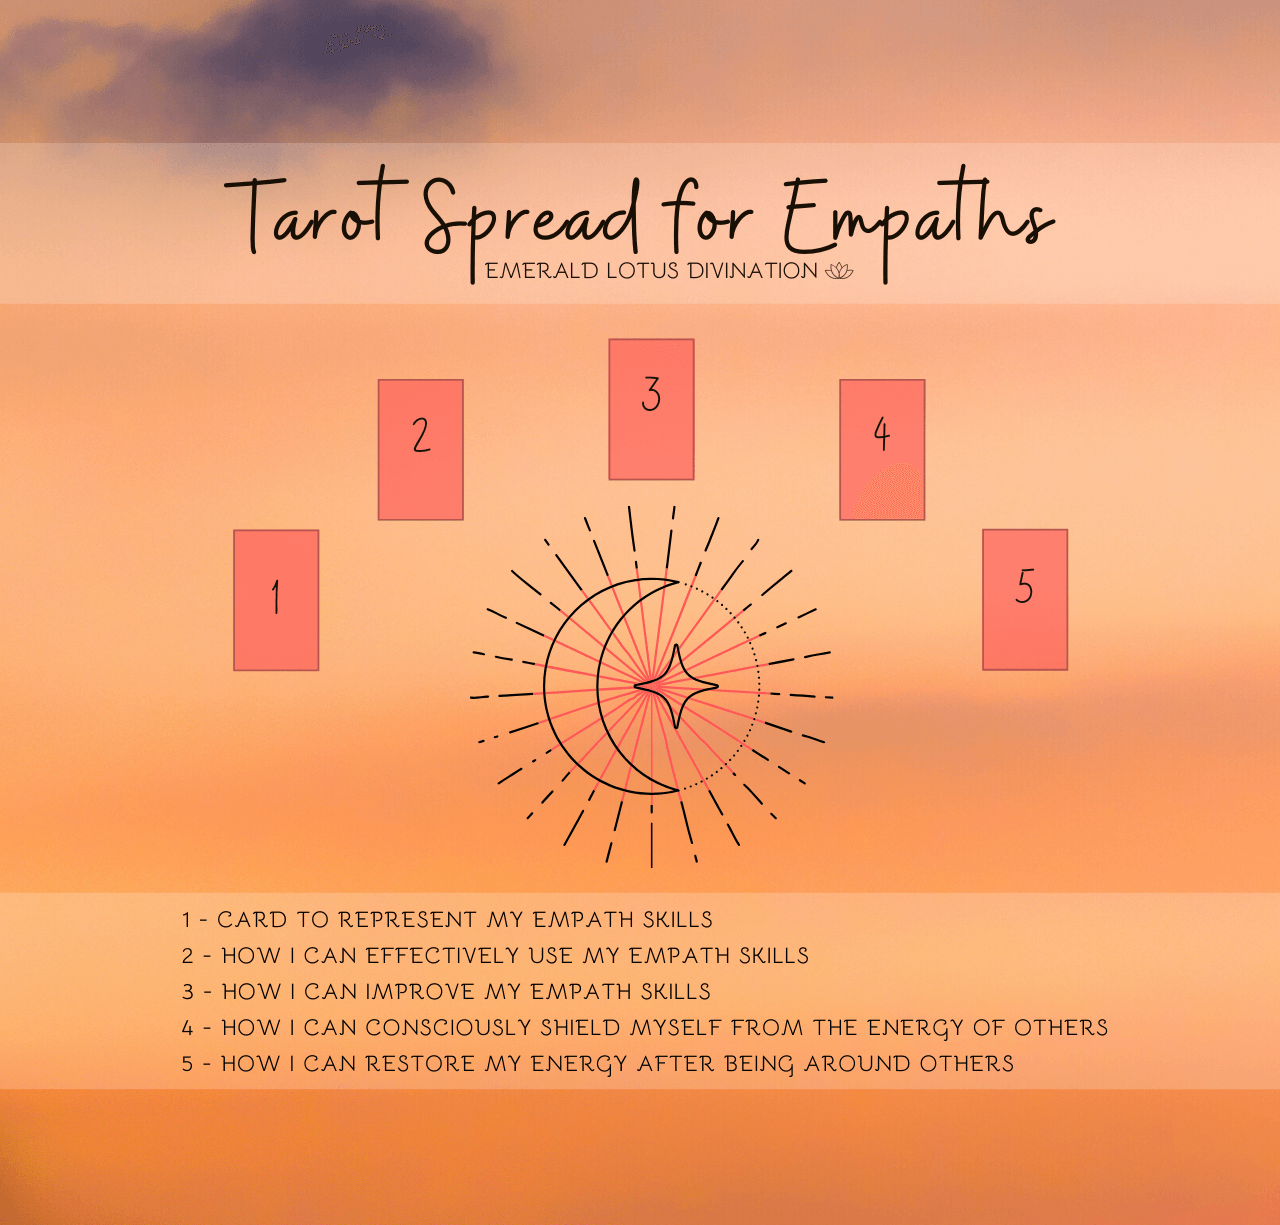 Tarot+Spread+for+Empaths+-+Emerald+Lotus+Divination.png